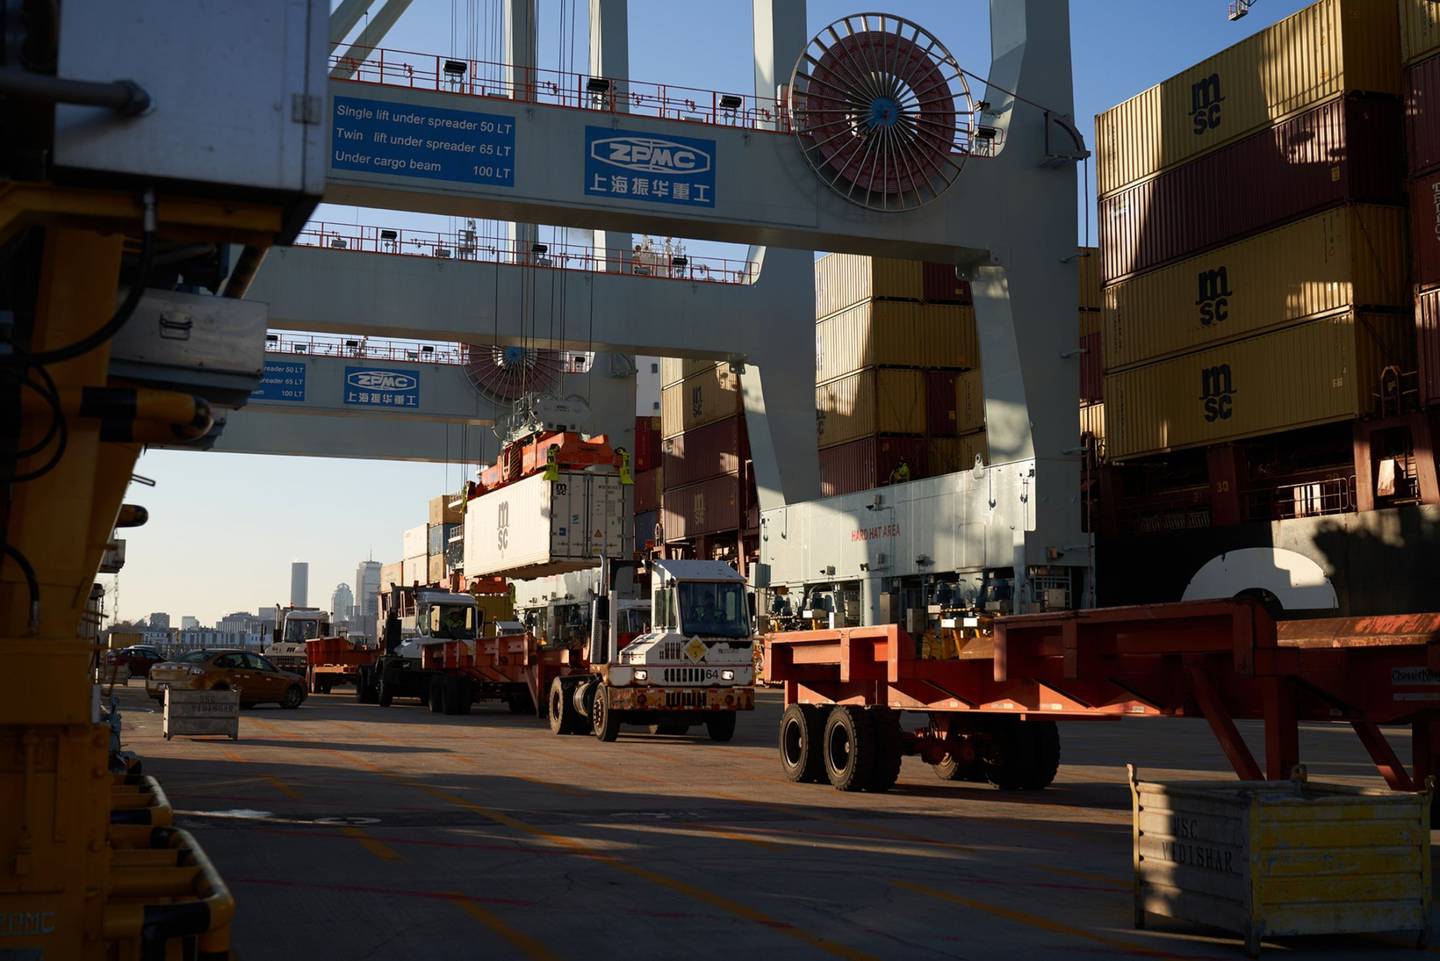 Shipping containers are loaded onto trucks at the Port of Boston's Conley Terminal in Boston, Massachusetts, U.S., on Friday, Jan. 21, 2022. Massport invested $850 million in the Port of Boston Conley Terminal to become big-ship ready and better compete with larger rivals.